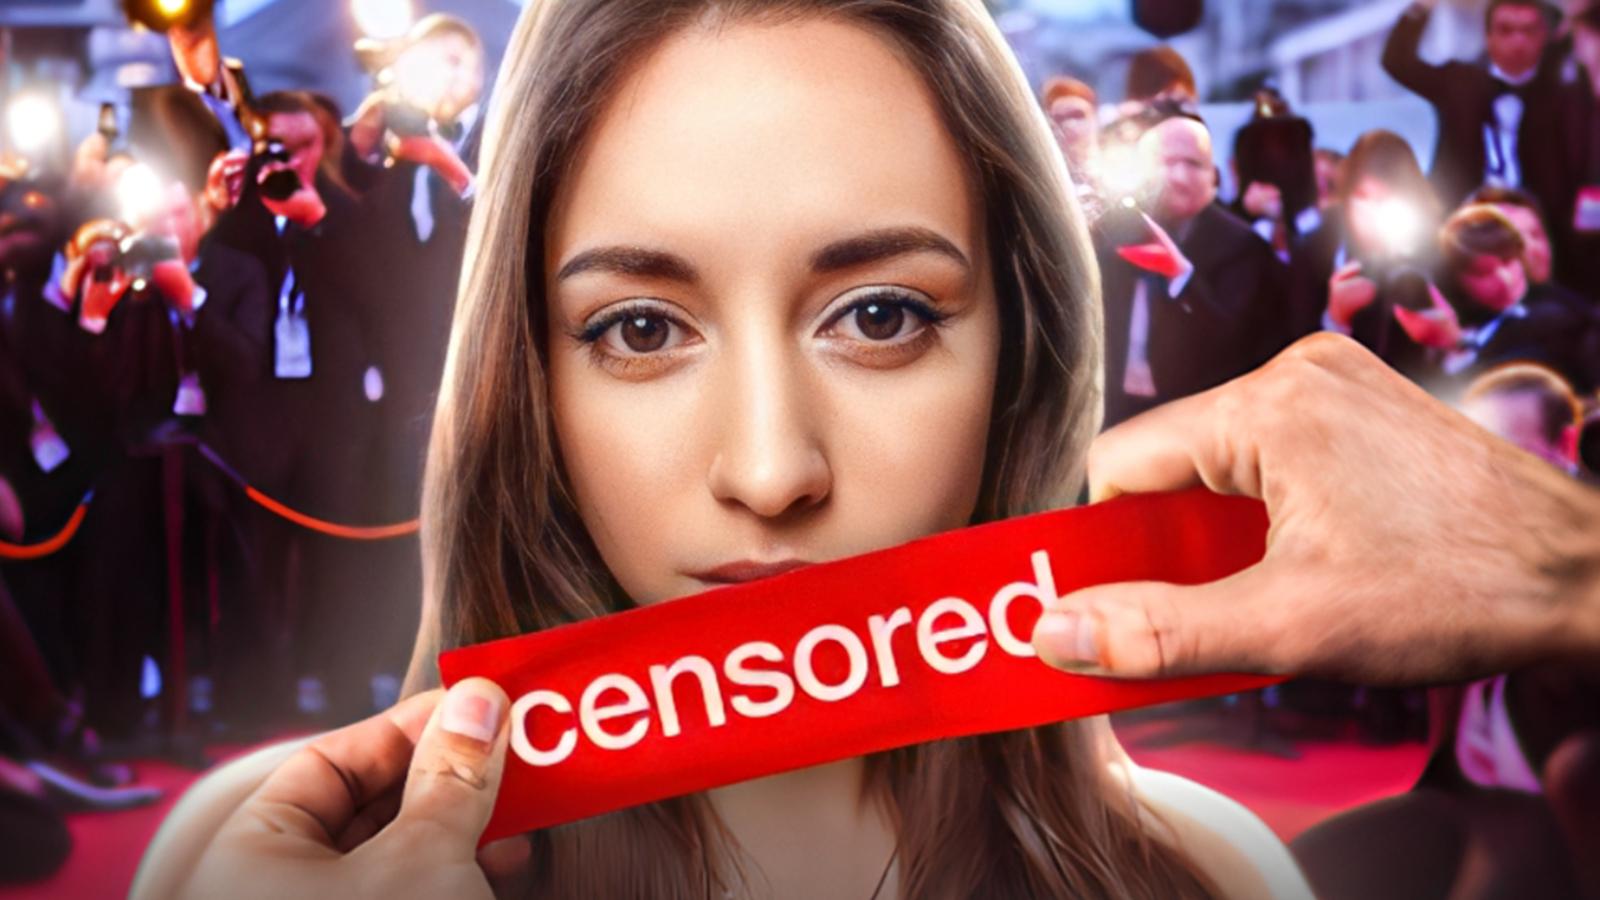 The Twitch Creator Busted For Looking At AI Porn Of Fellow Streamers,  Explained